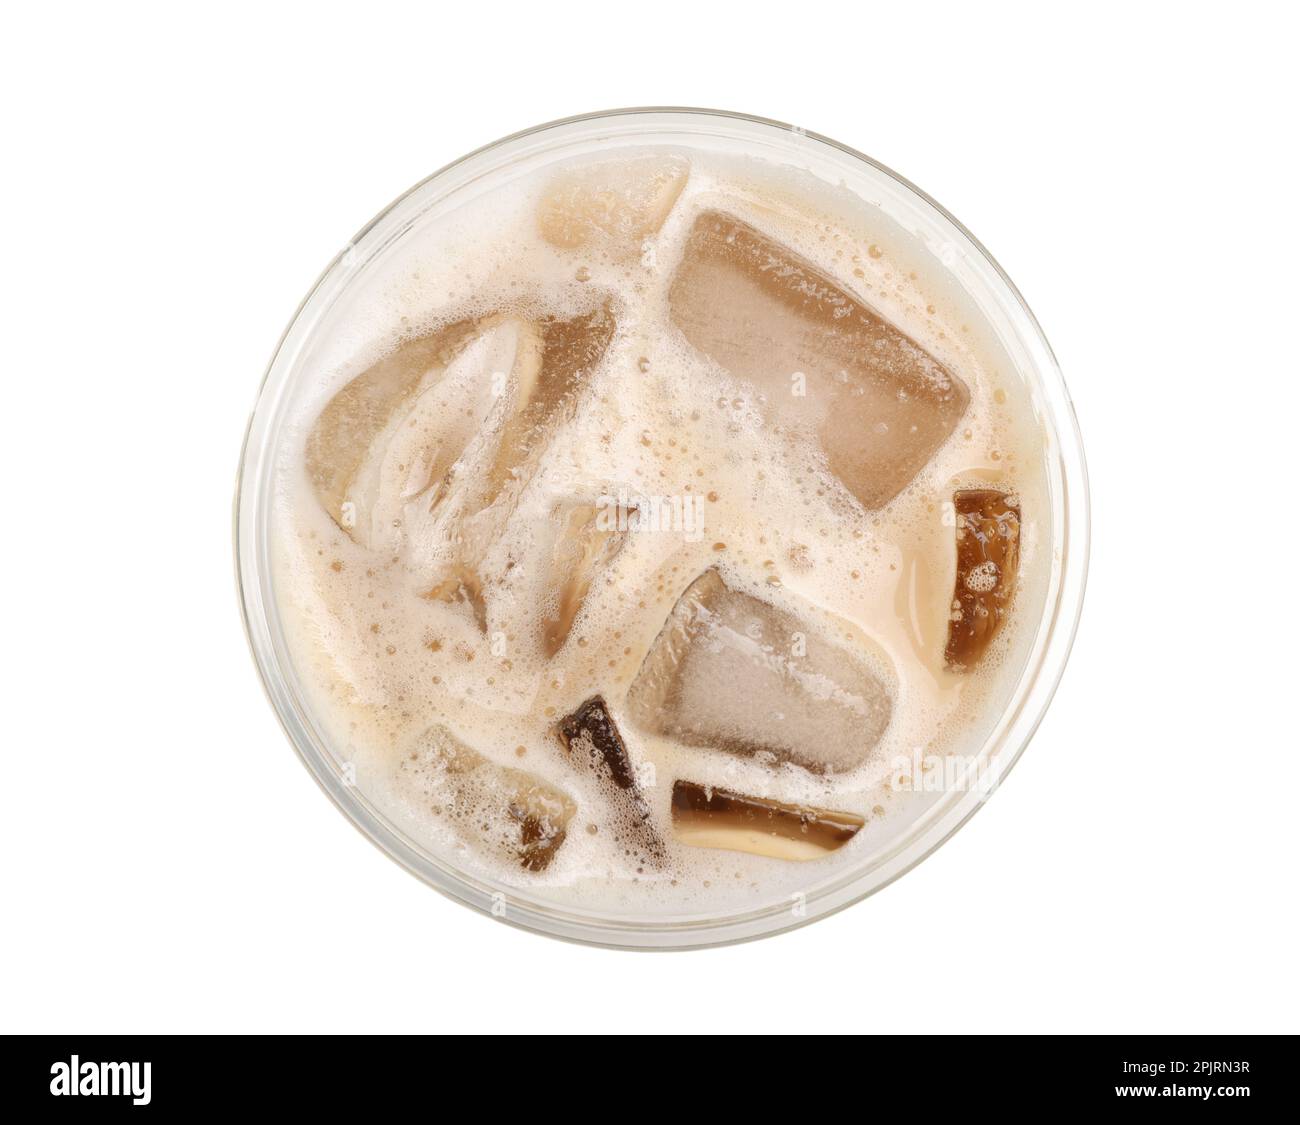 Plastic cup of cold coffee on white background Stock Photo - Alamy